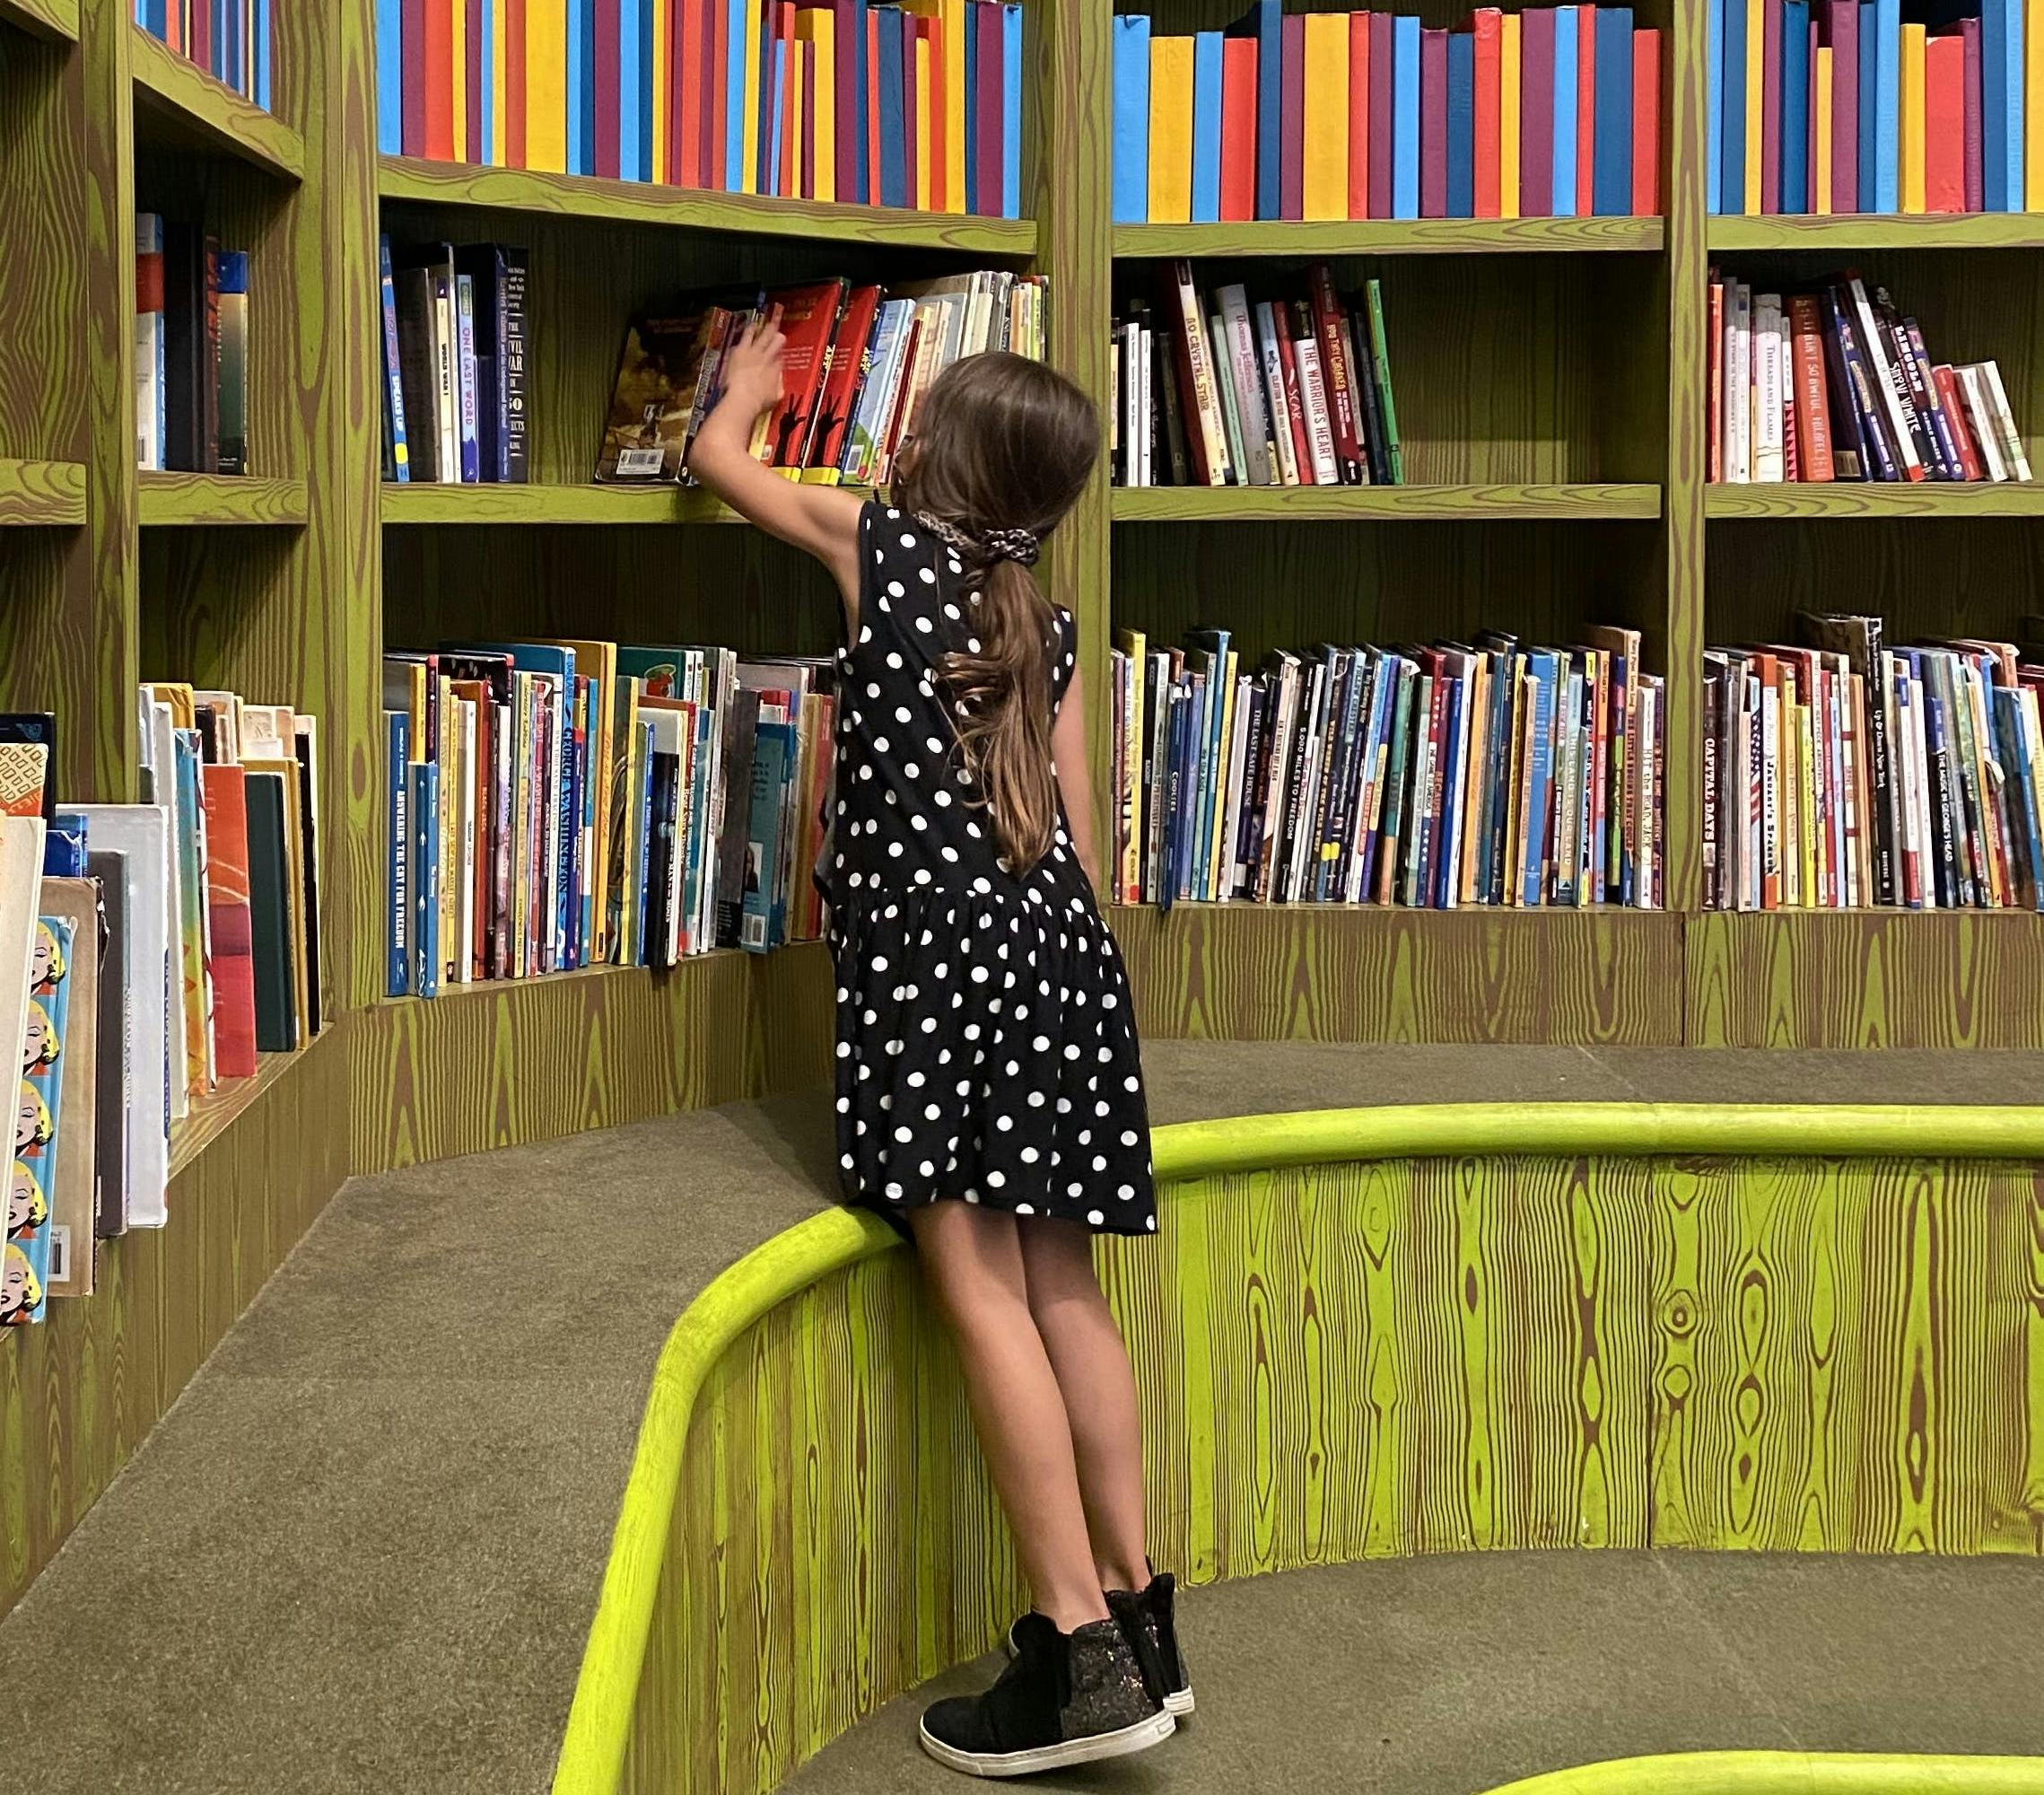 A young child faces away from the camera and reaches up to look at books in the barbara K. Lipman Library